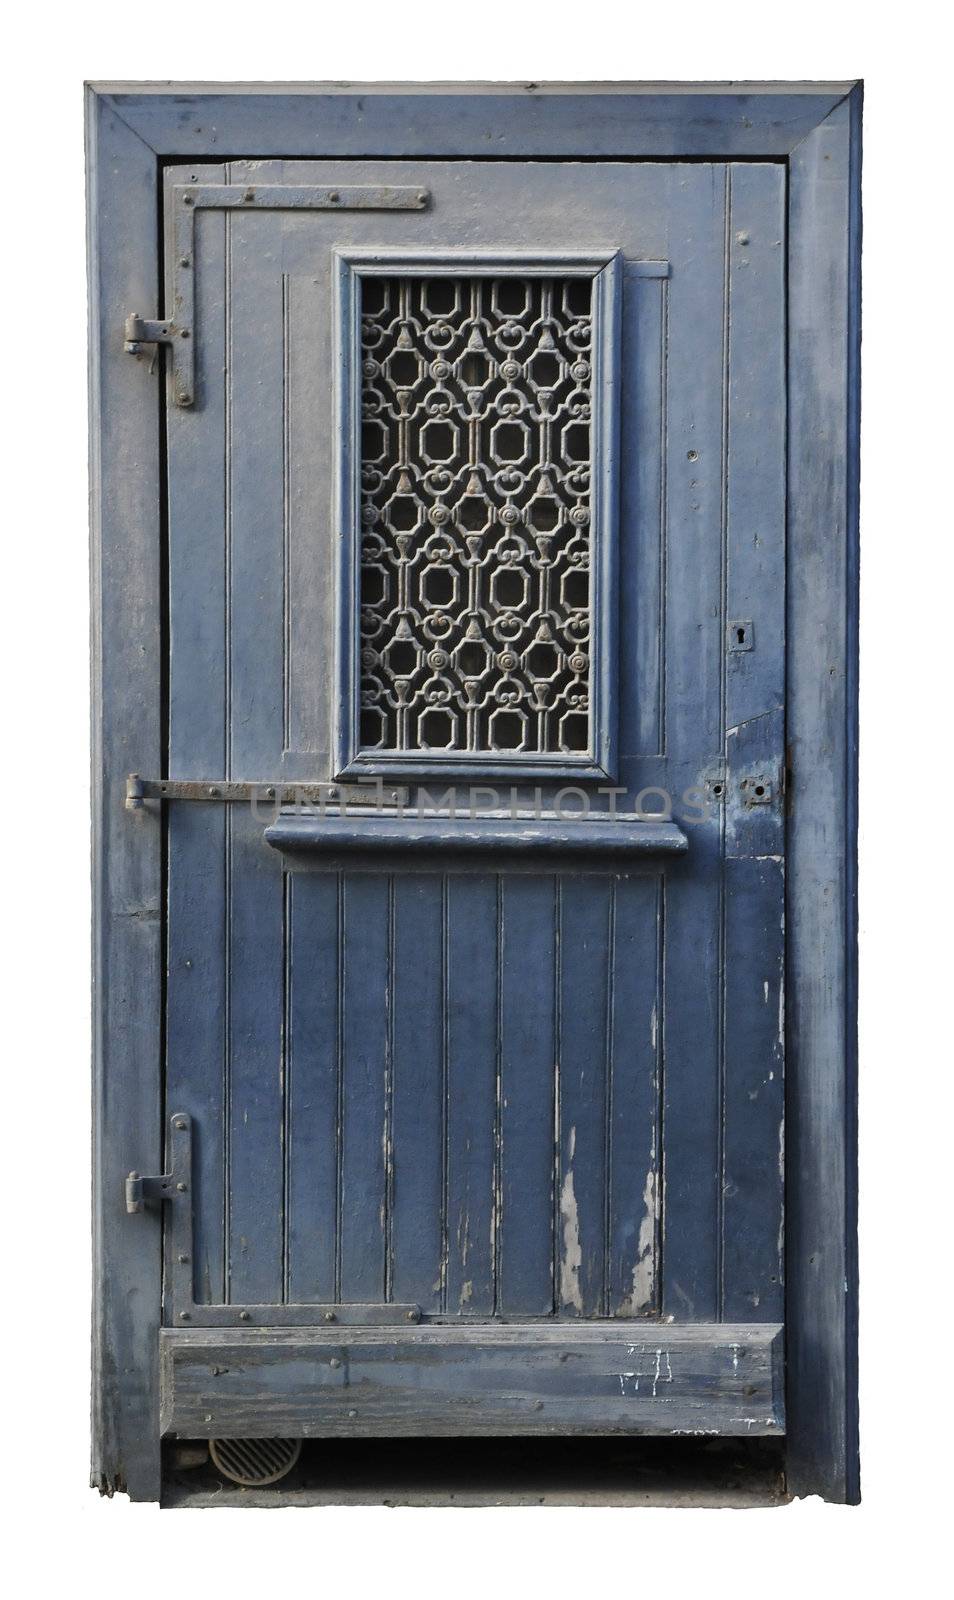 Dusted wood door painted in blue with wrought iron on a window by shkyo30